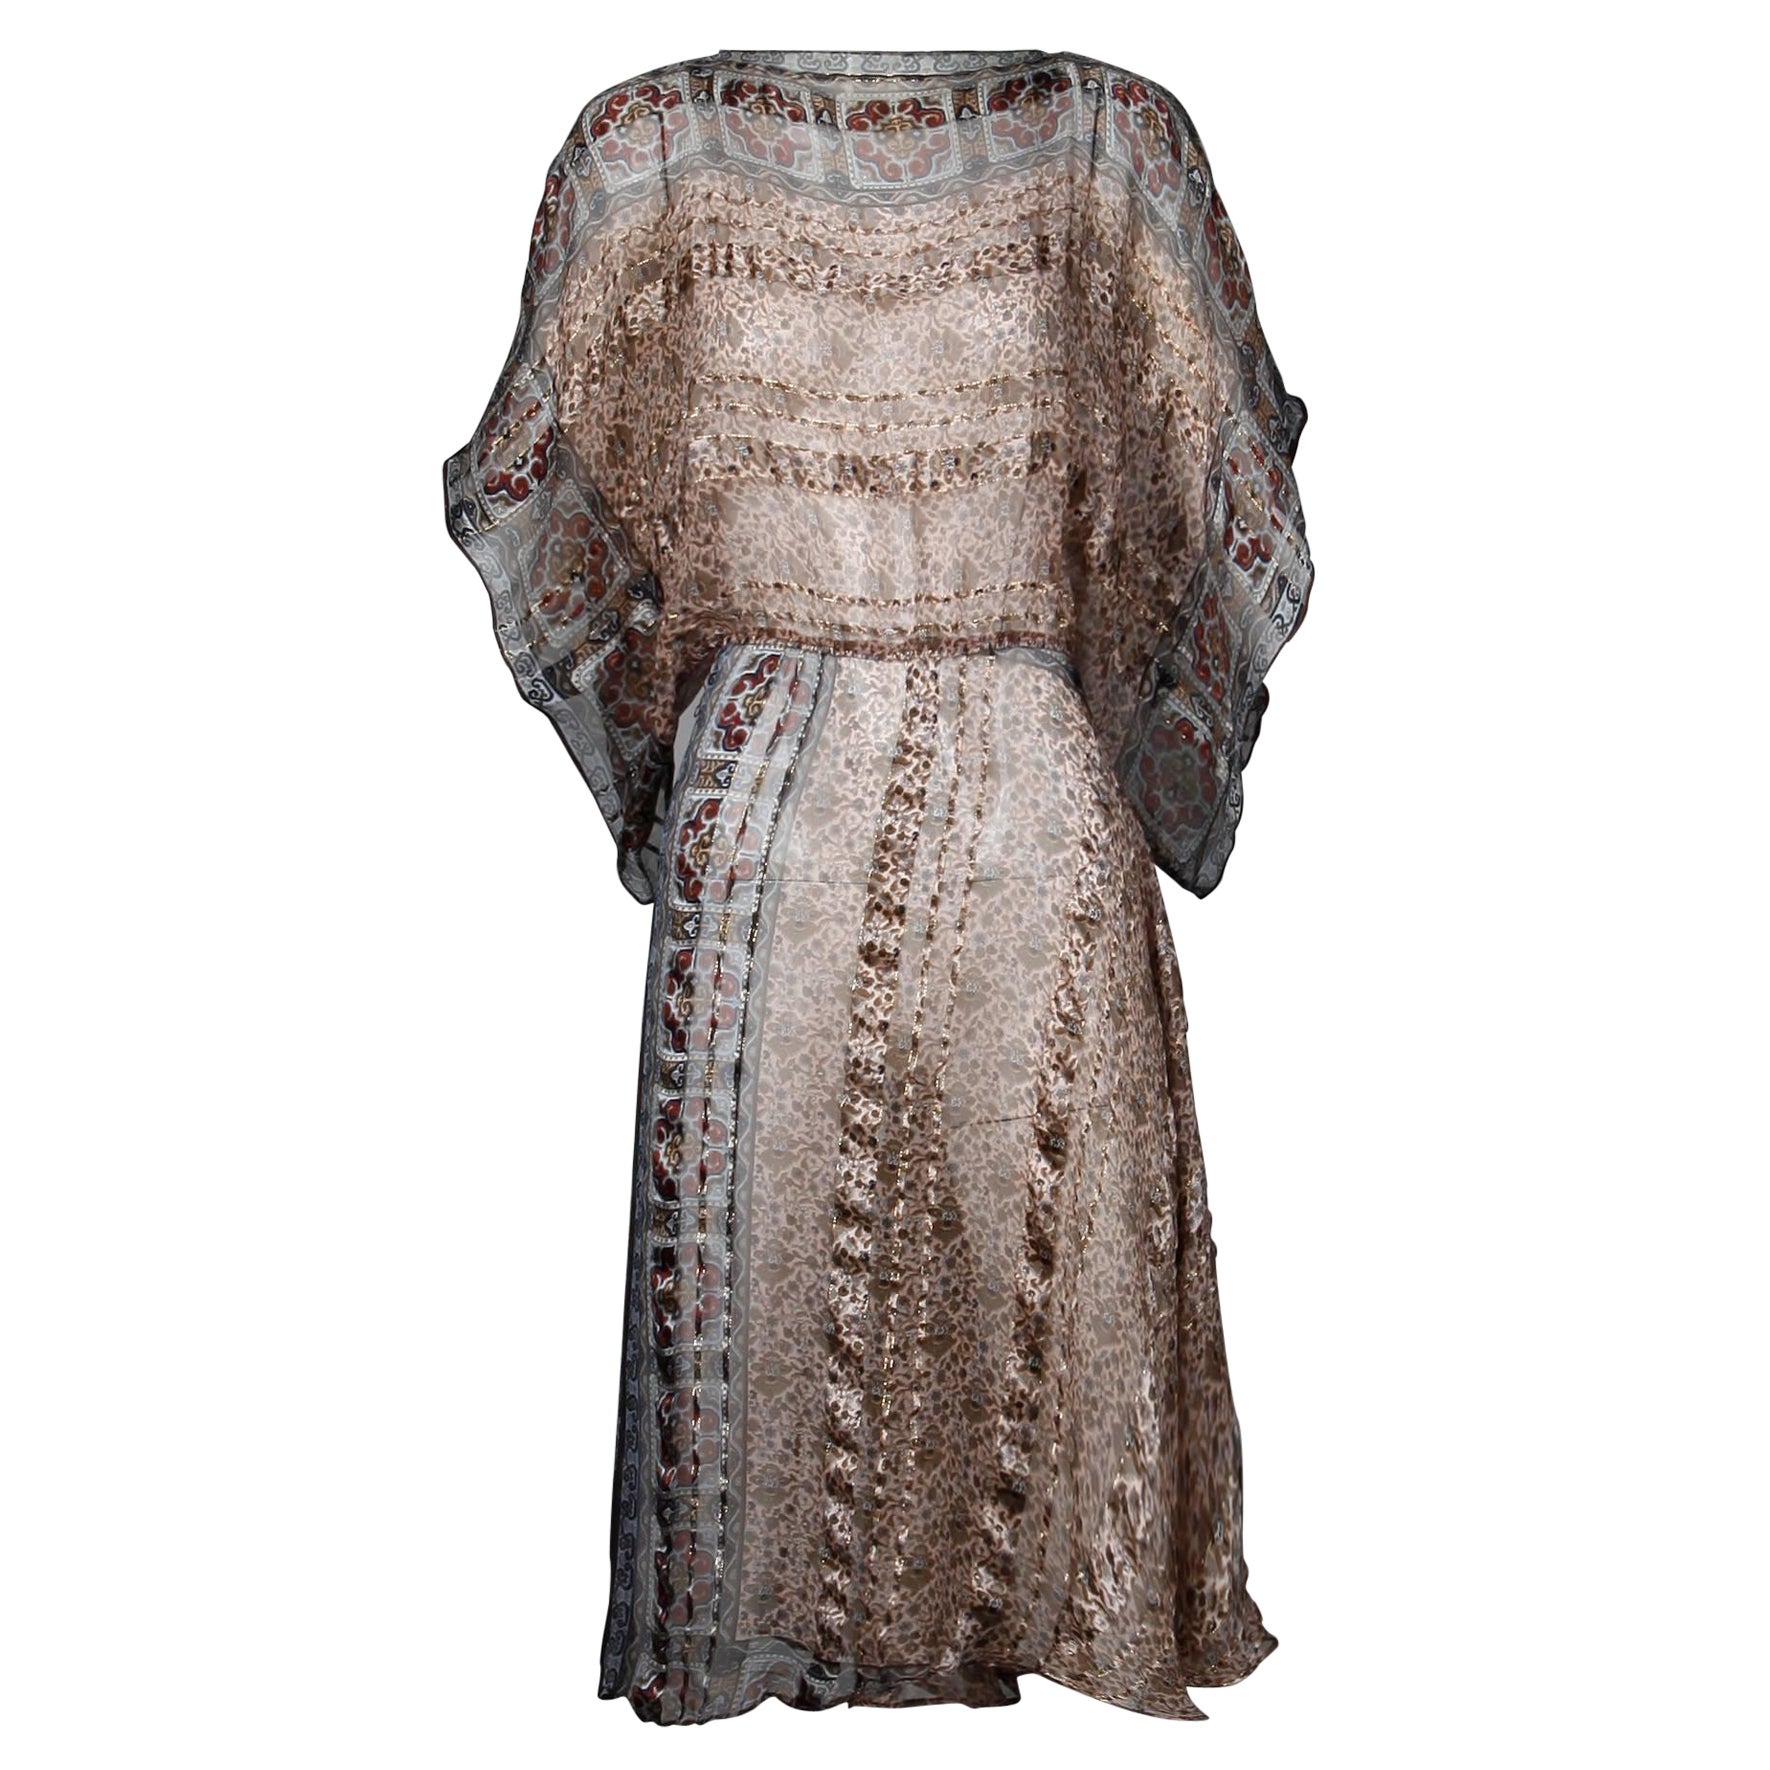 1970s Vintage Metallic Paper Thin Indian Print Silk Dress with Batwing Sleeves For Sale